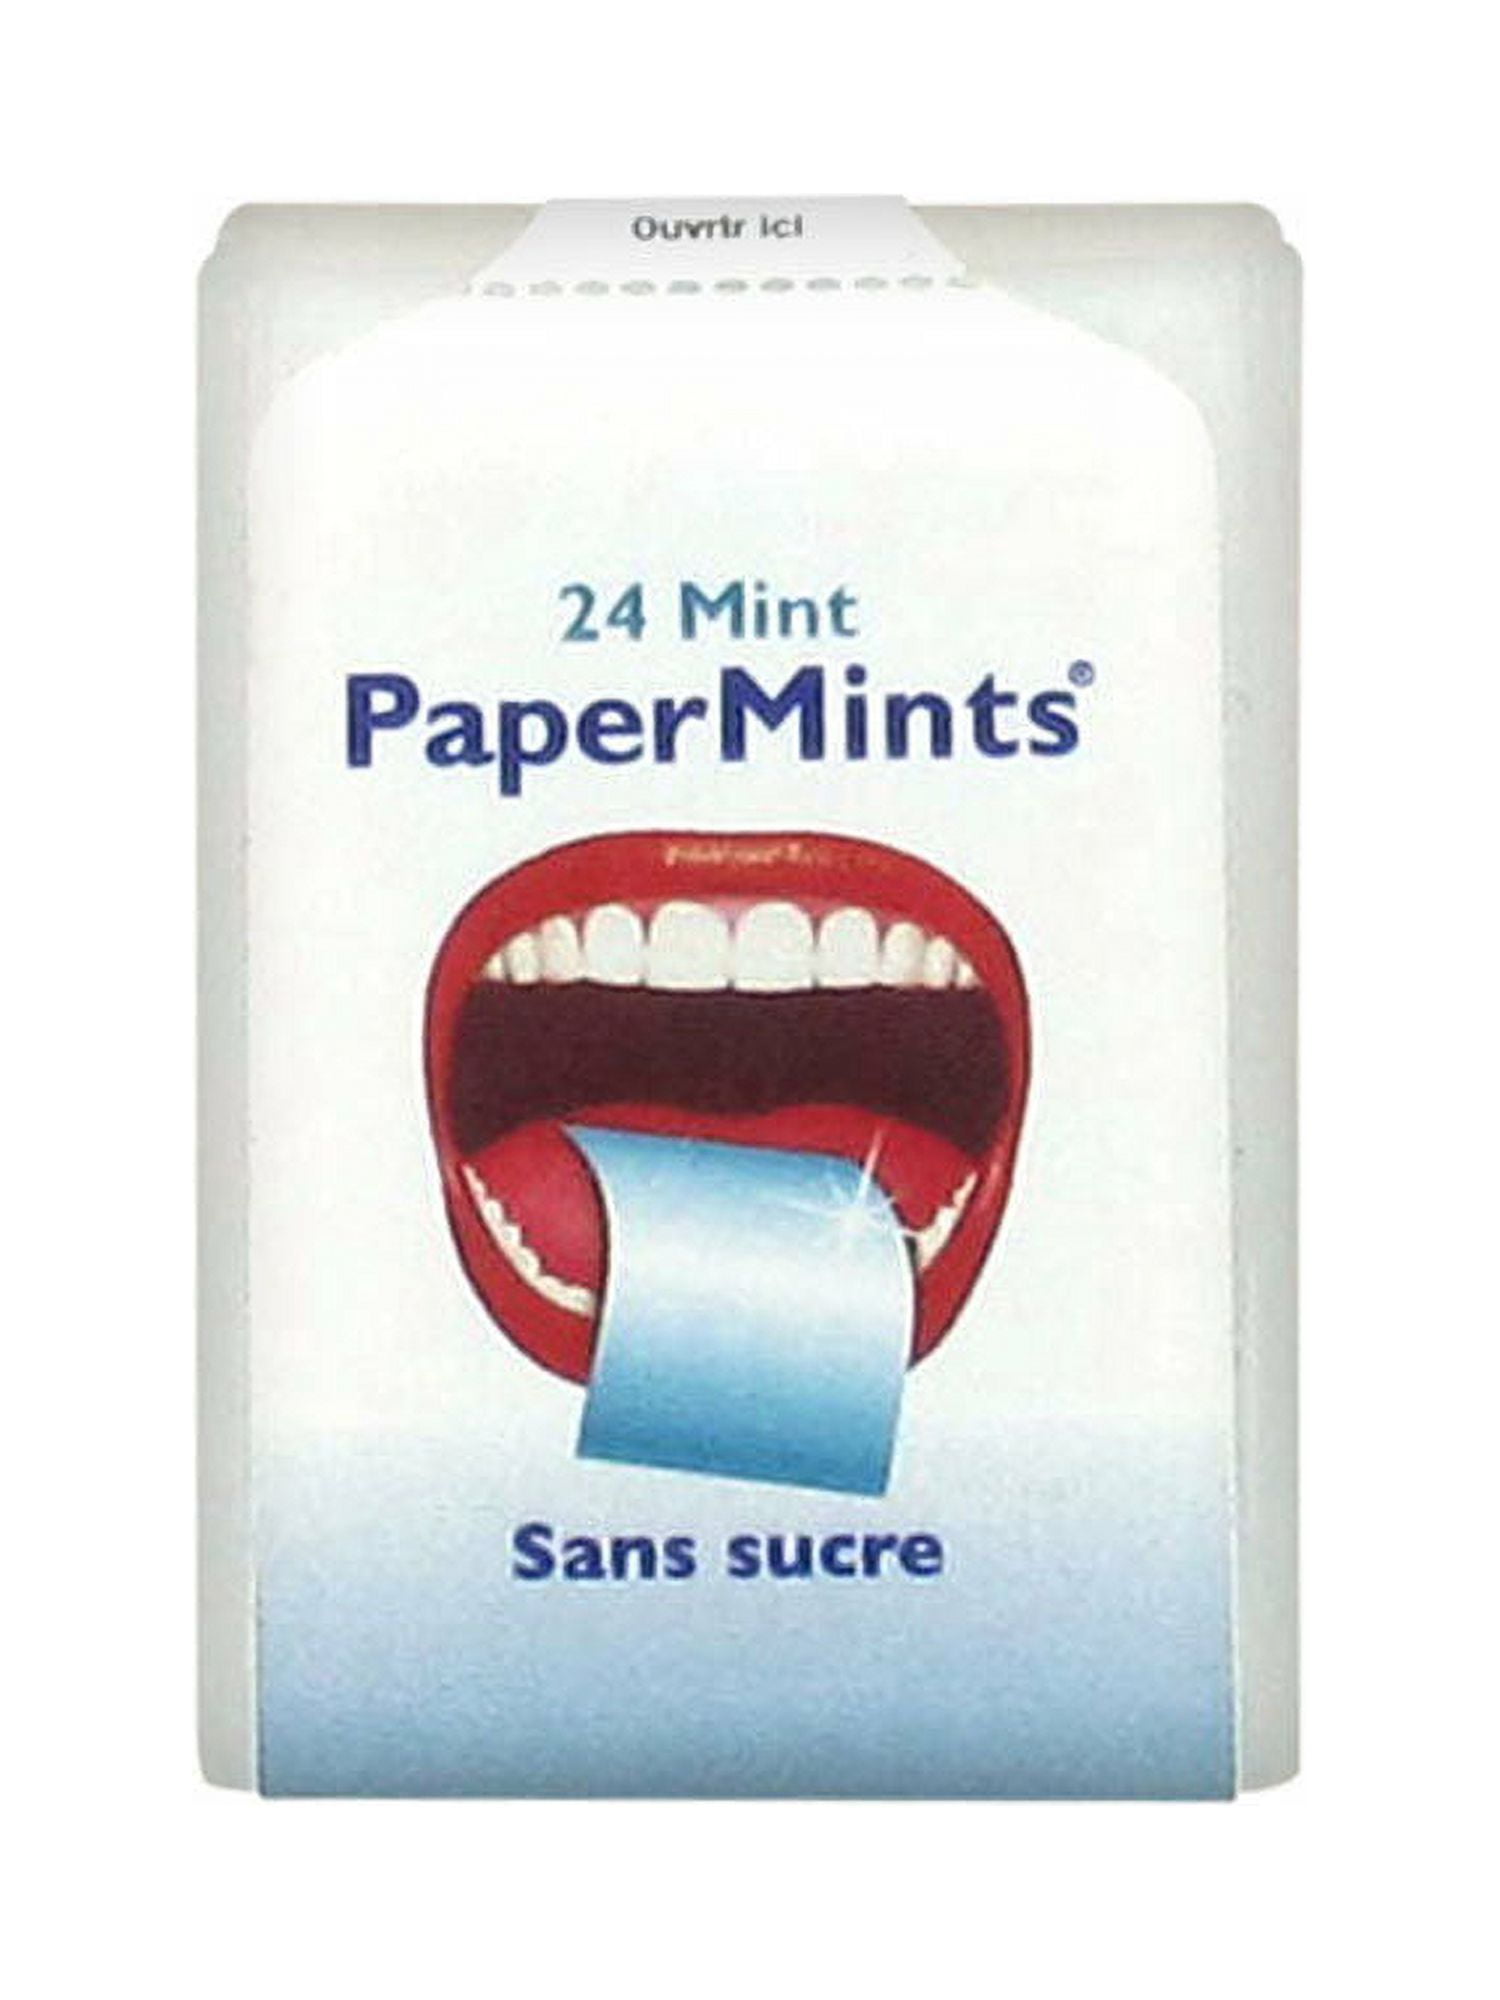 PaperMints Cool mint strips 3 x packs of 24 strips Sugar free by Paper mint